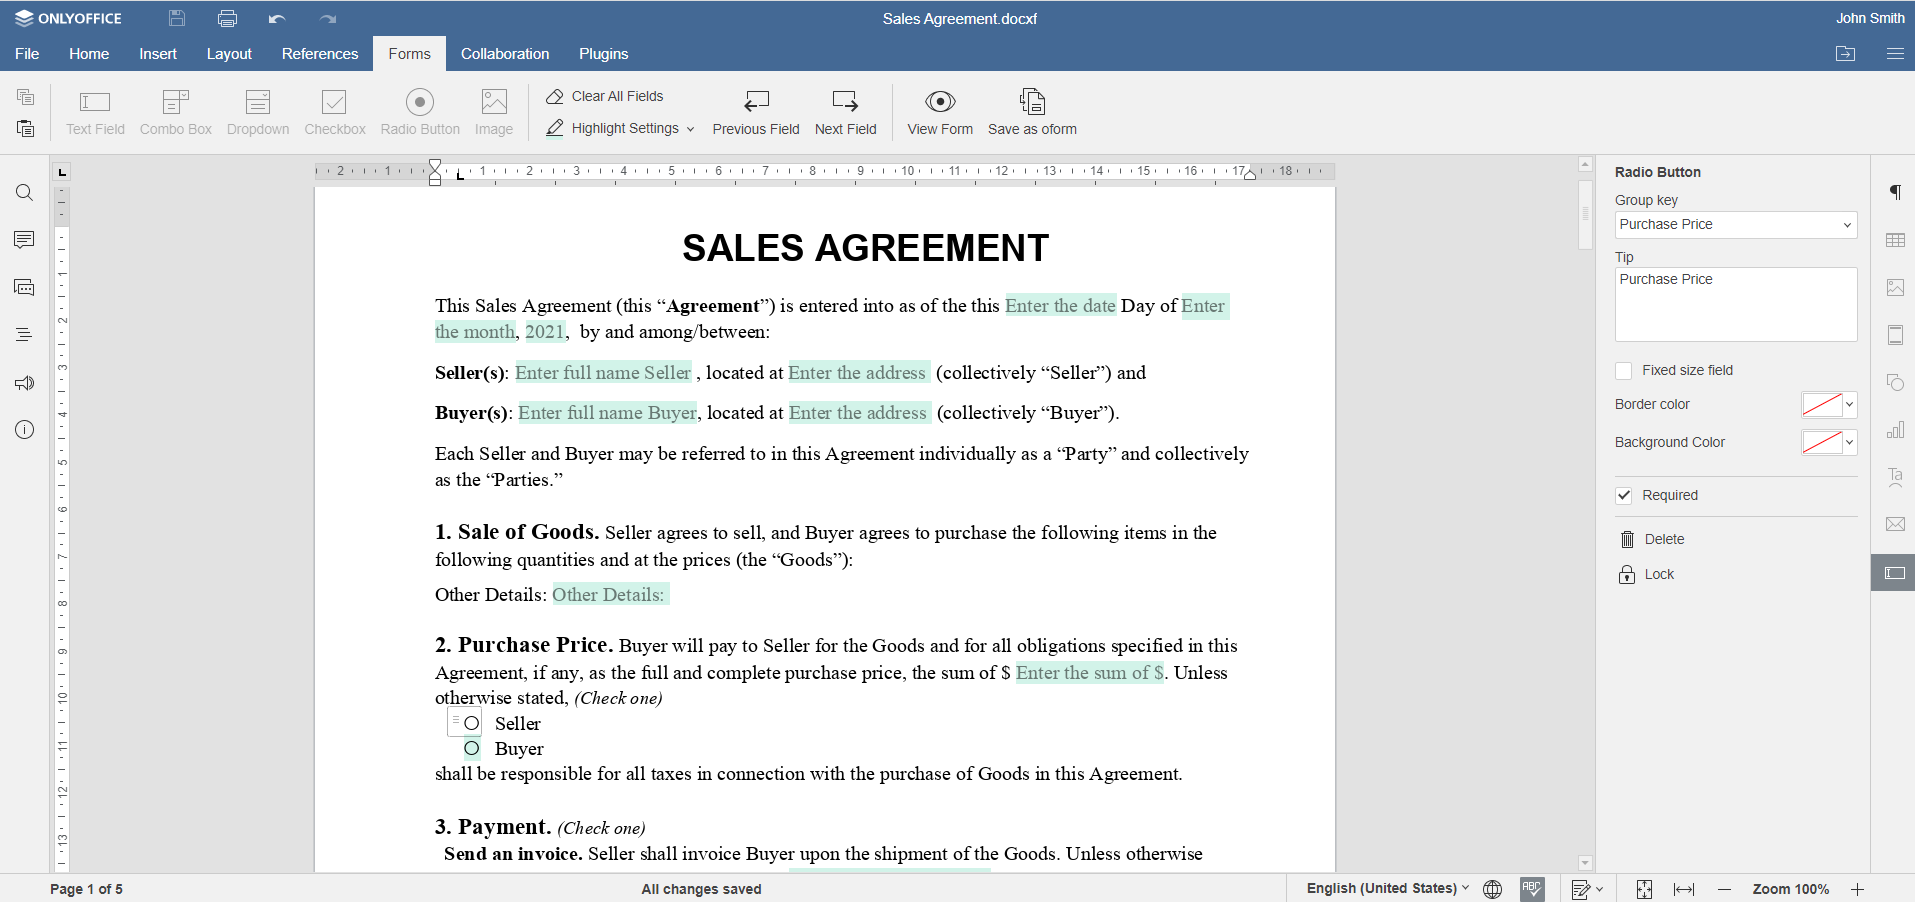 convert a Notice doc to a PowerPoint presentation